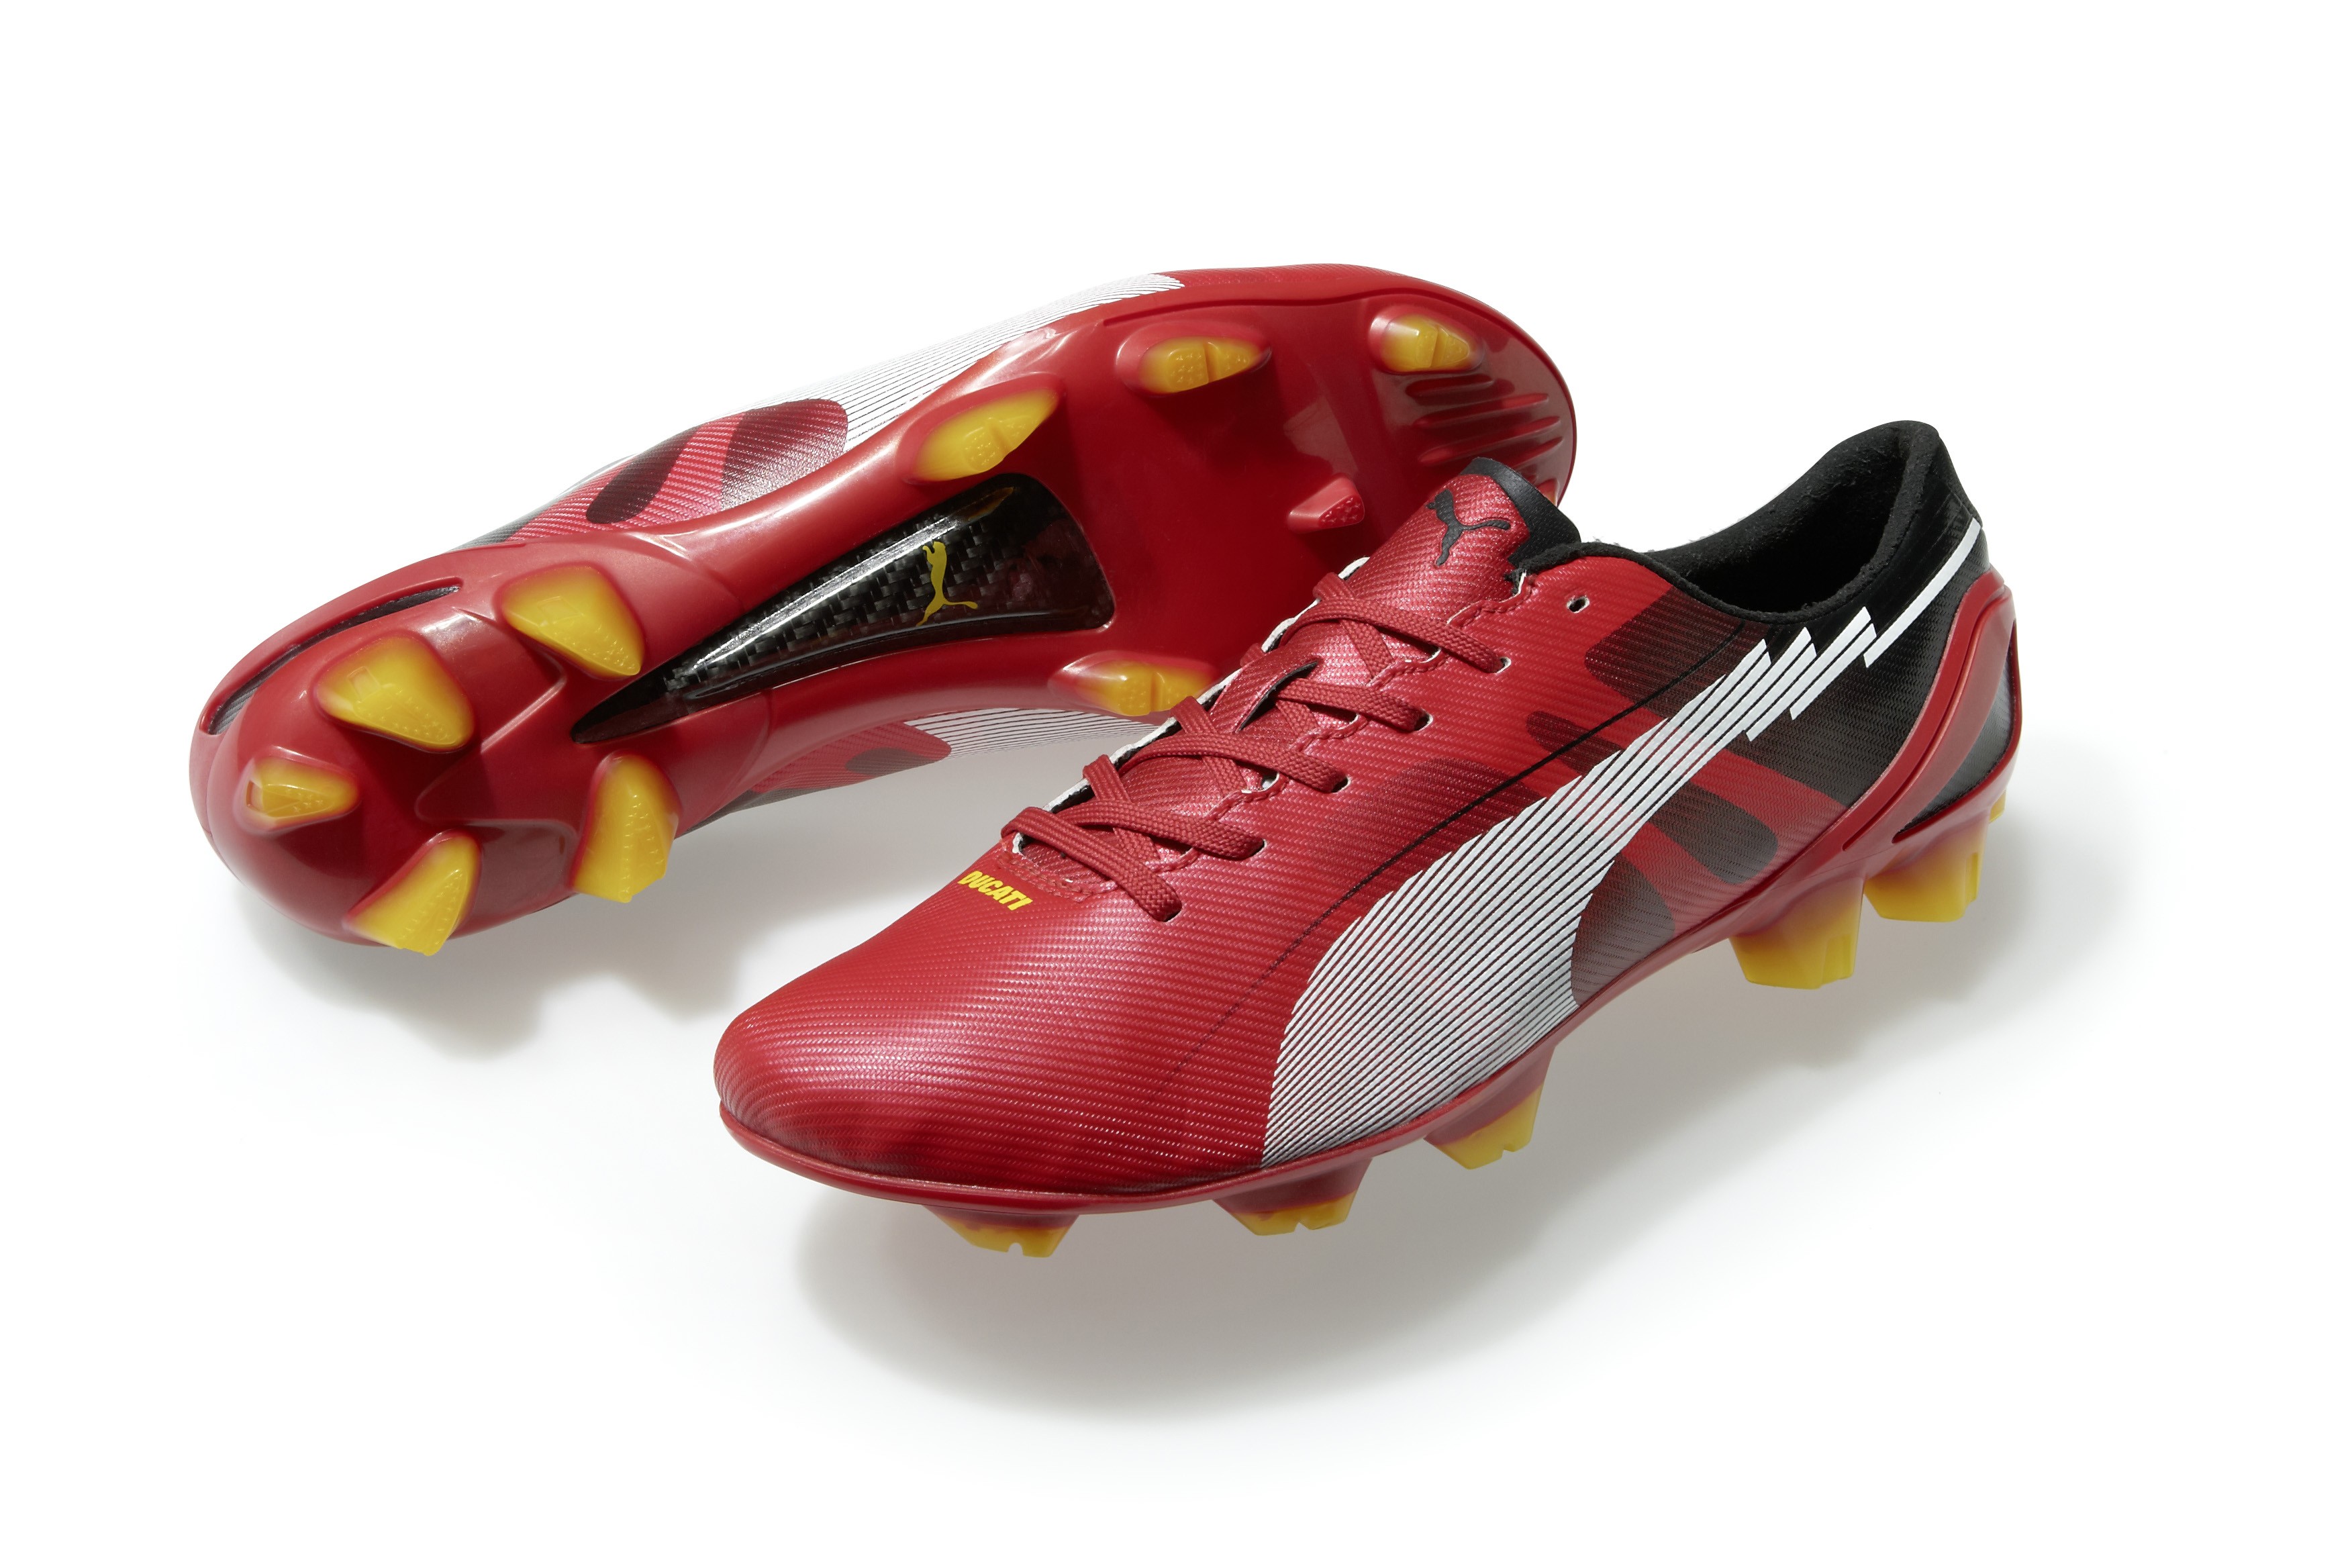 Football boot release: Puma launches 